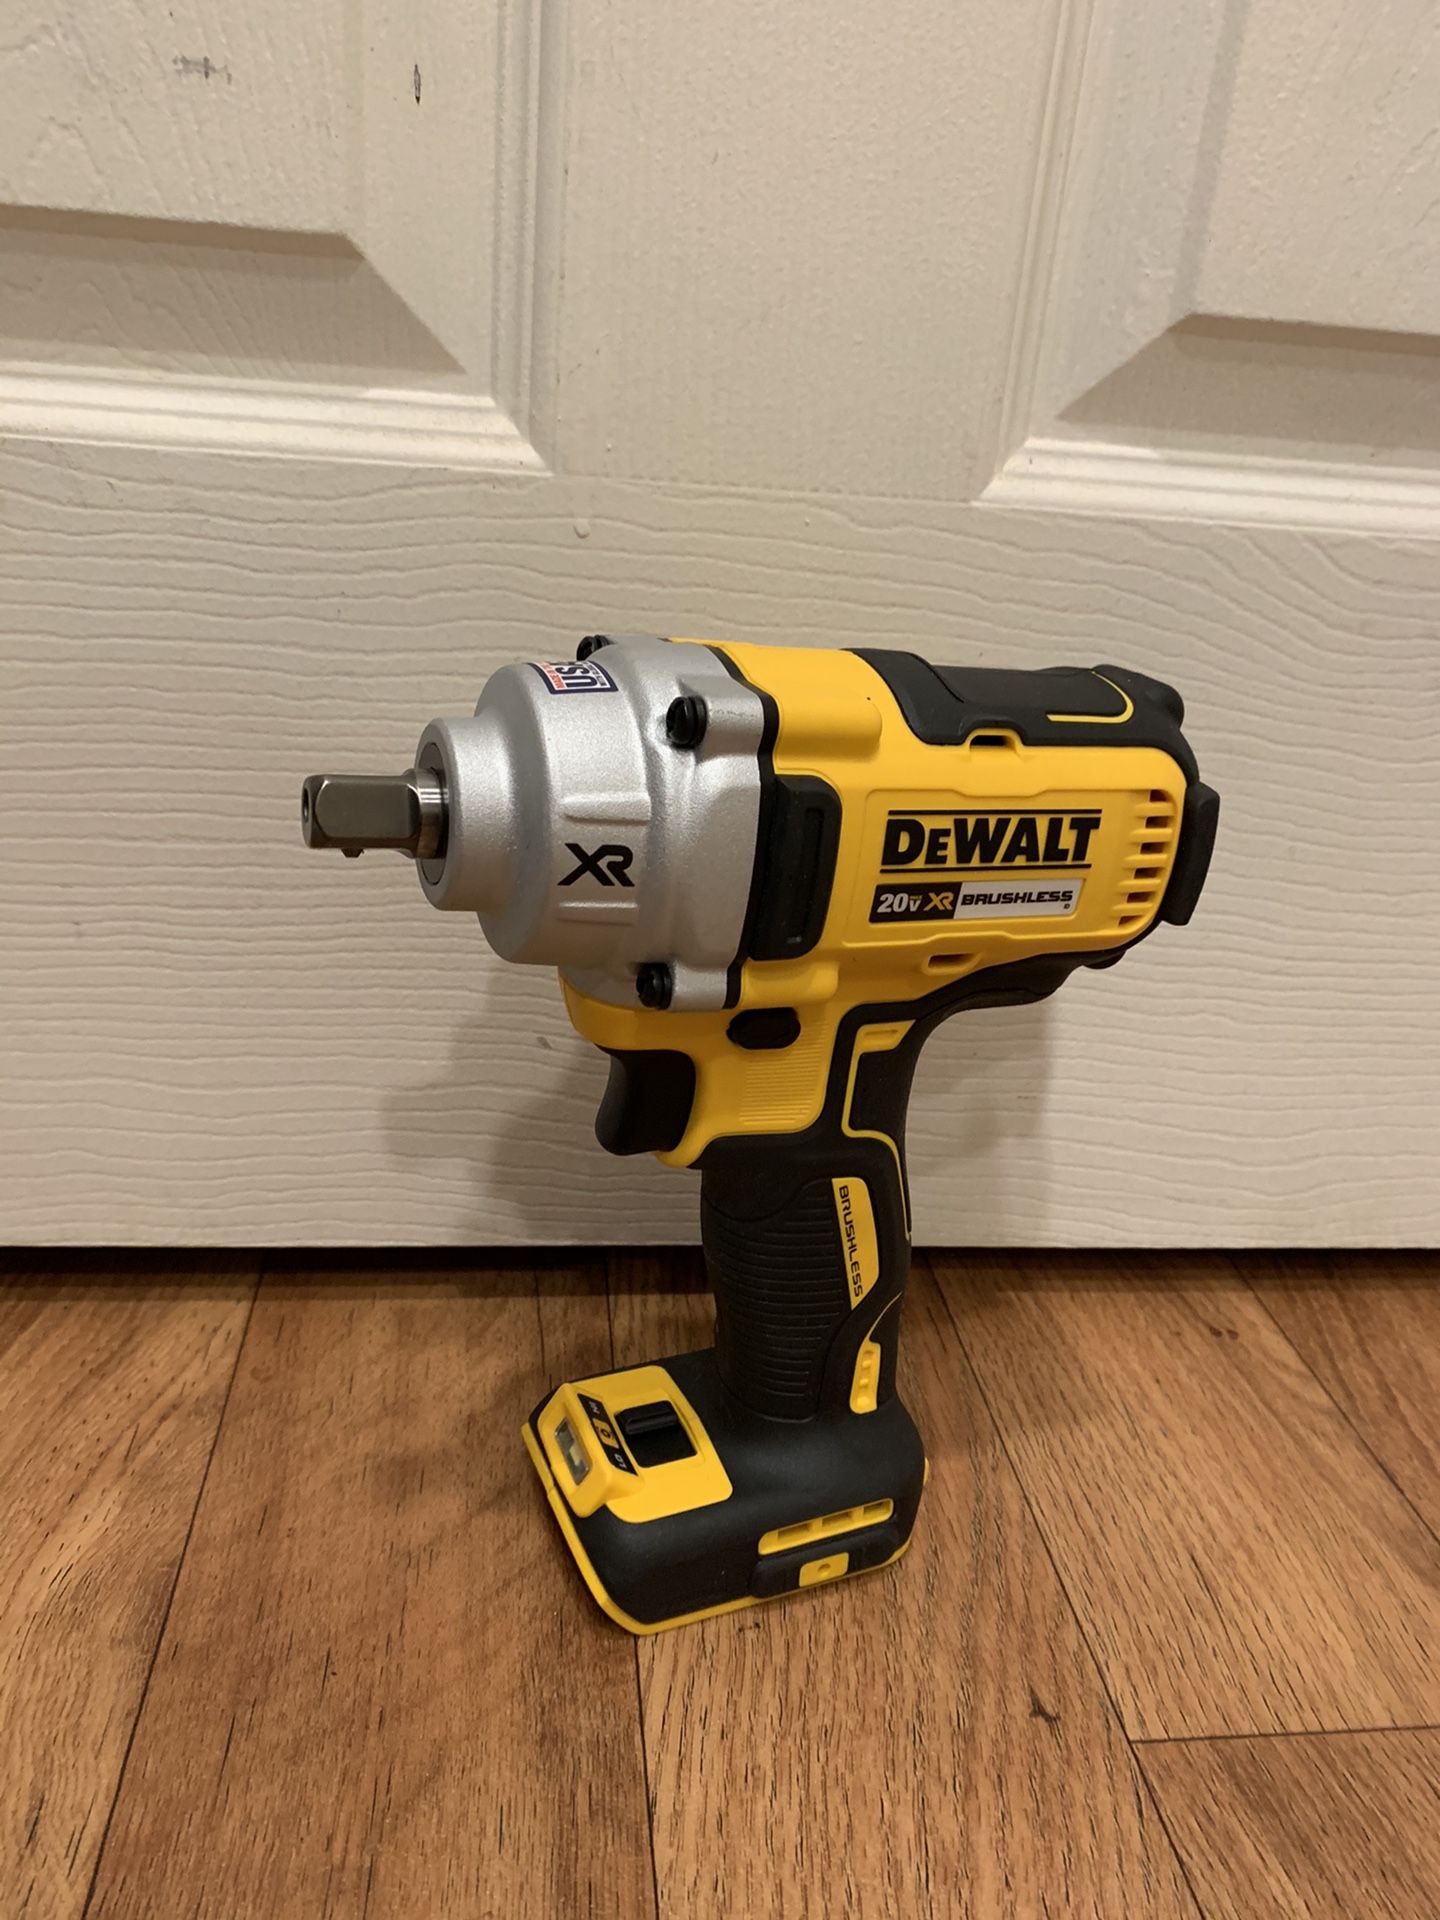 Dewalt 1/2” mid torque impact wrench (tool only). $120 price is firm